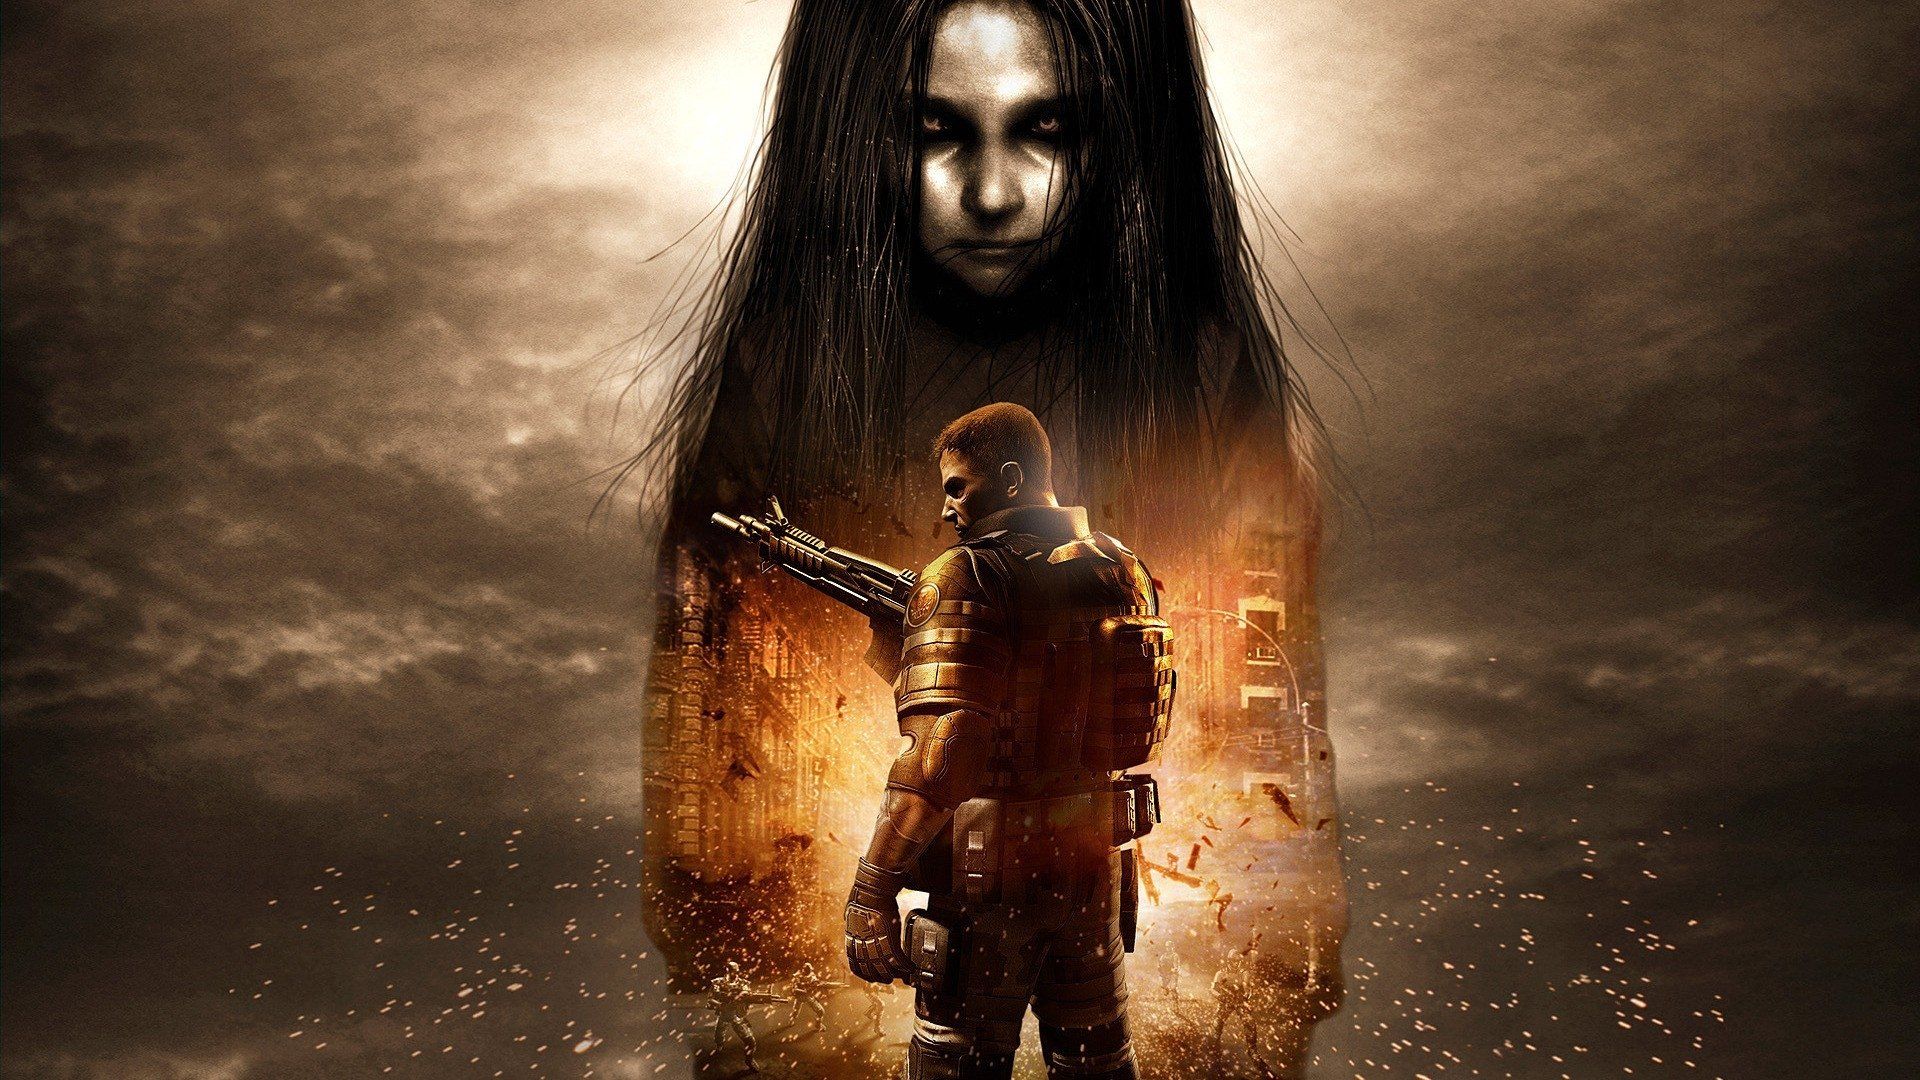 The player character stands in the centre holding a gun, superimposed over a larger image of a creepy little girl.